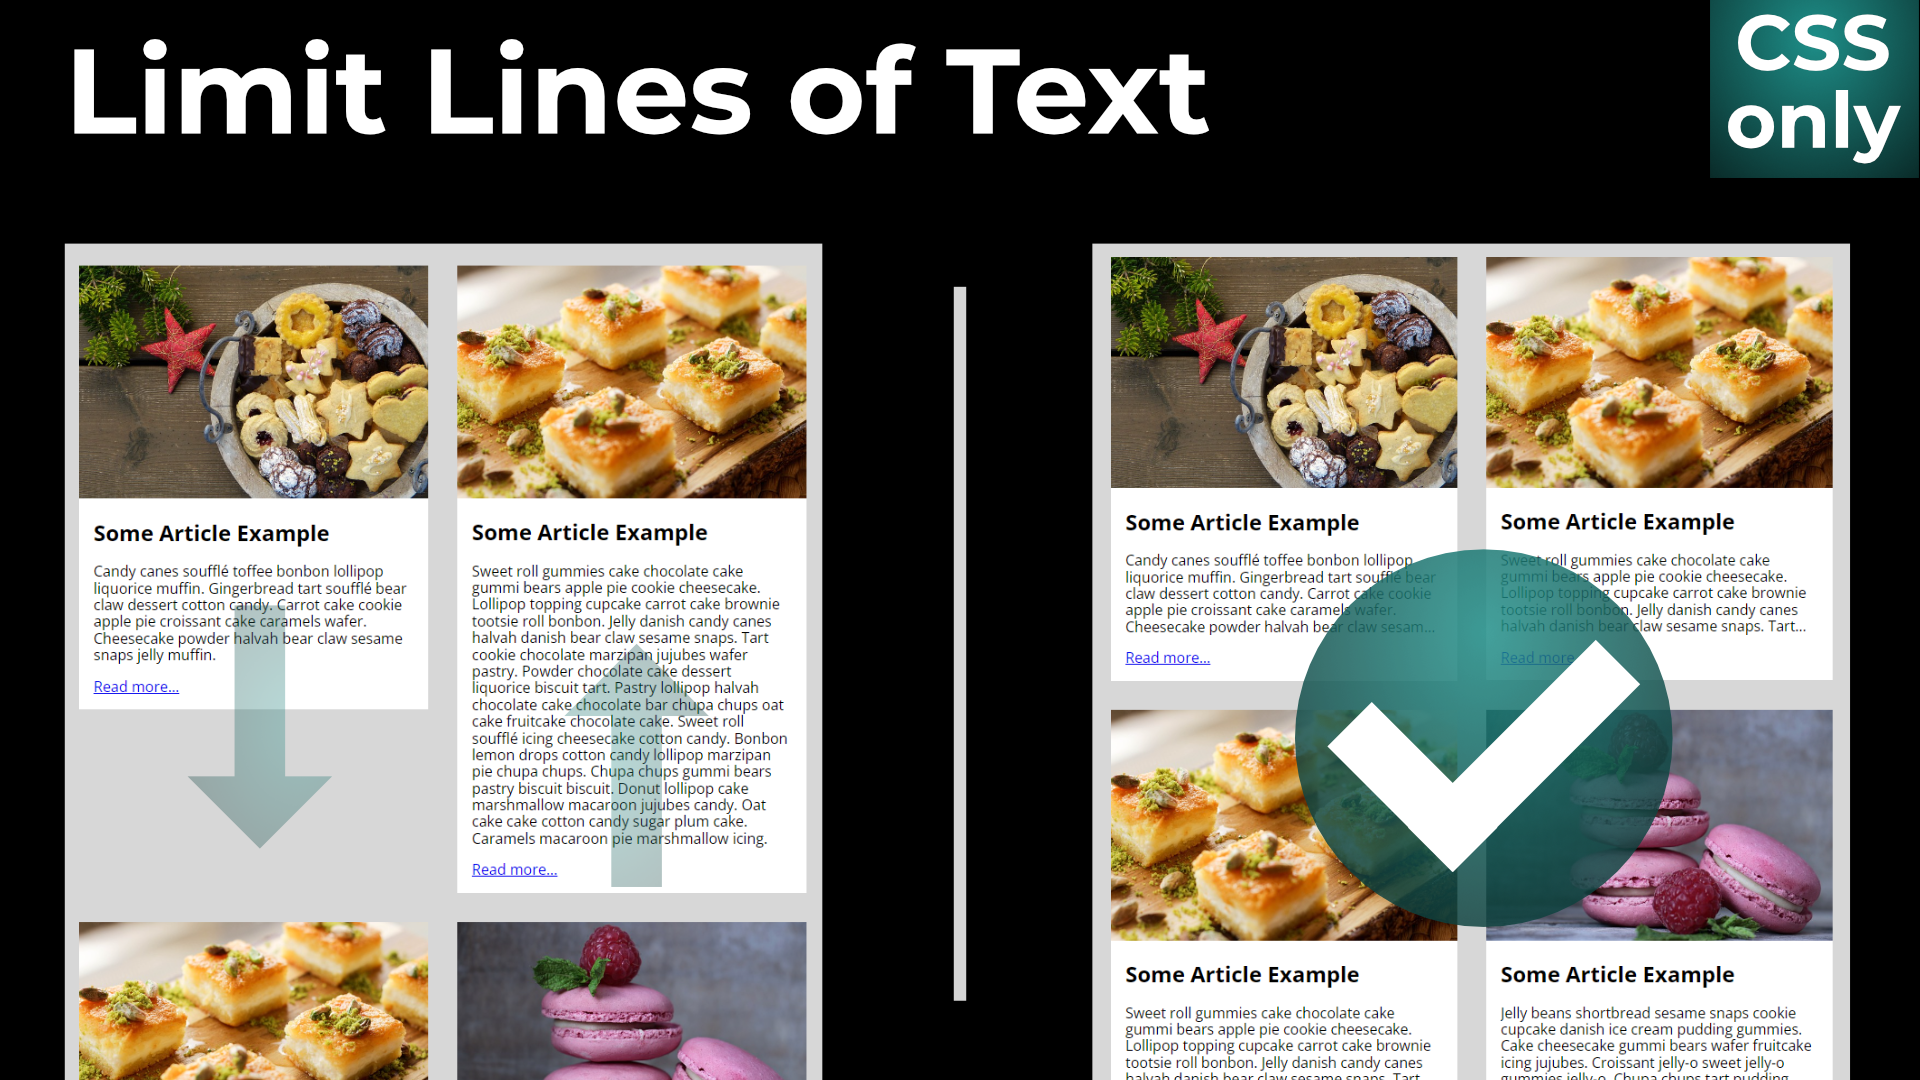 Limit number of lines of text with CSS only featured image